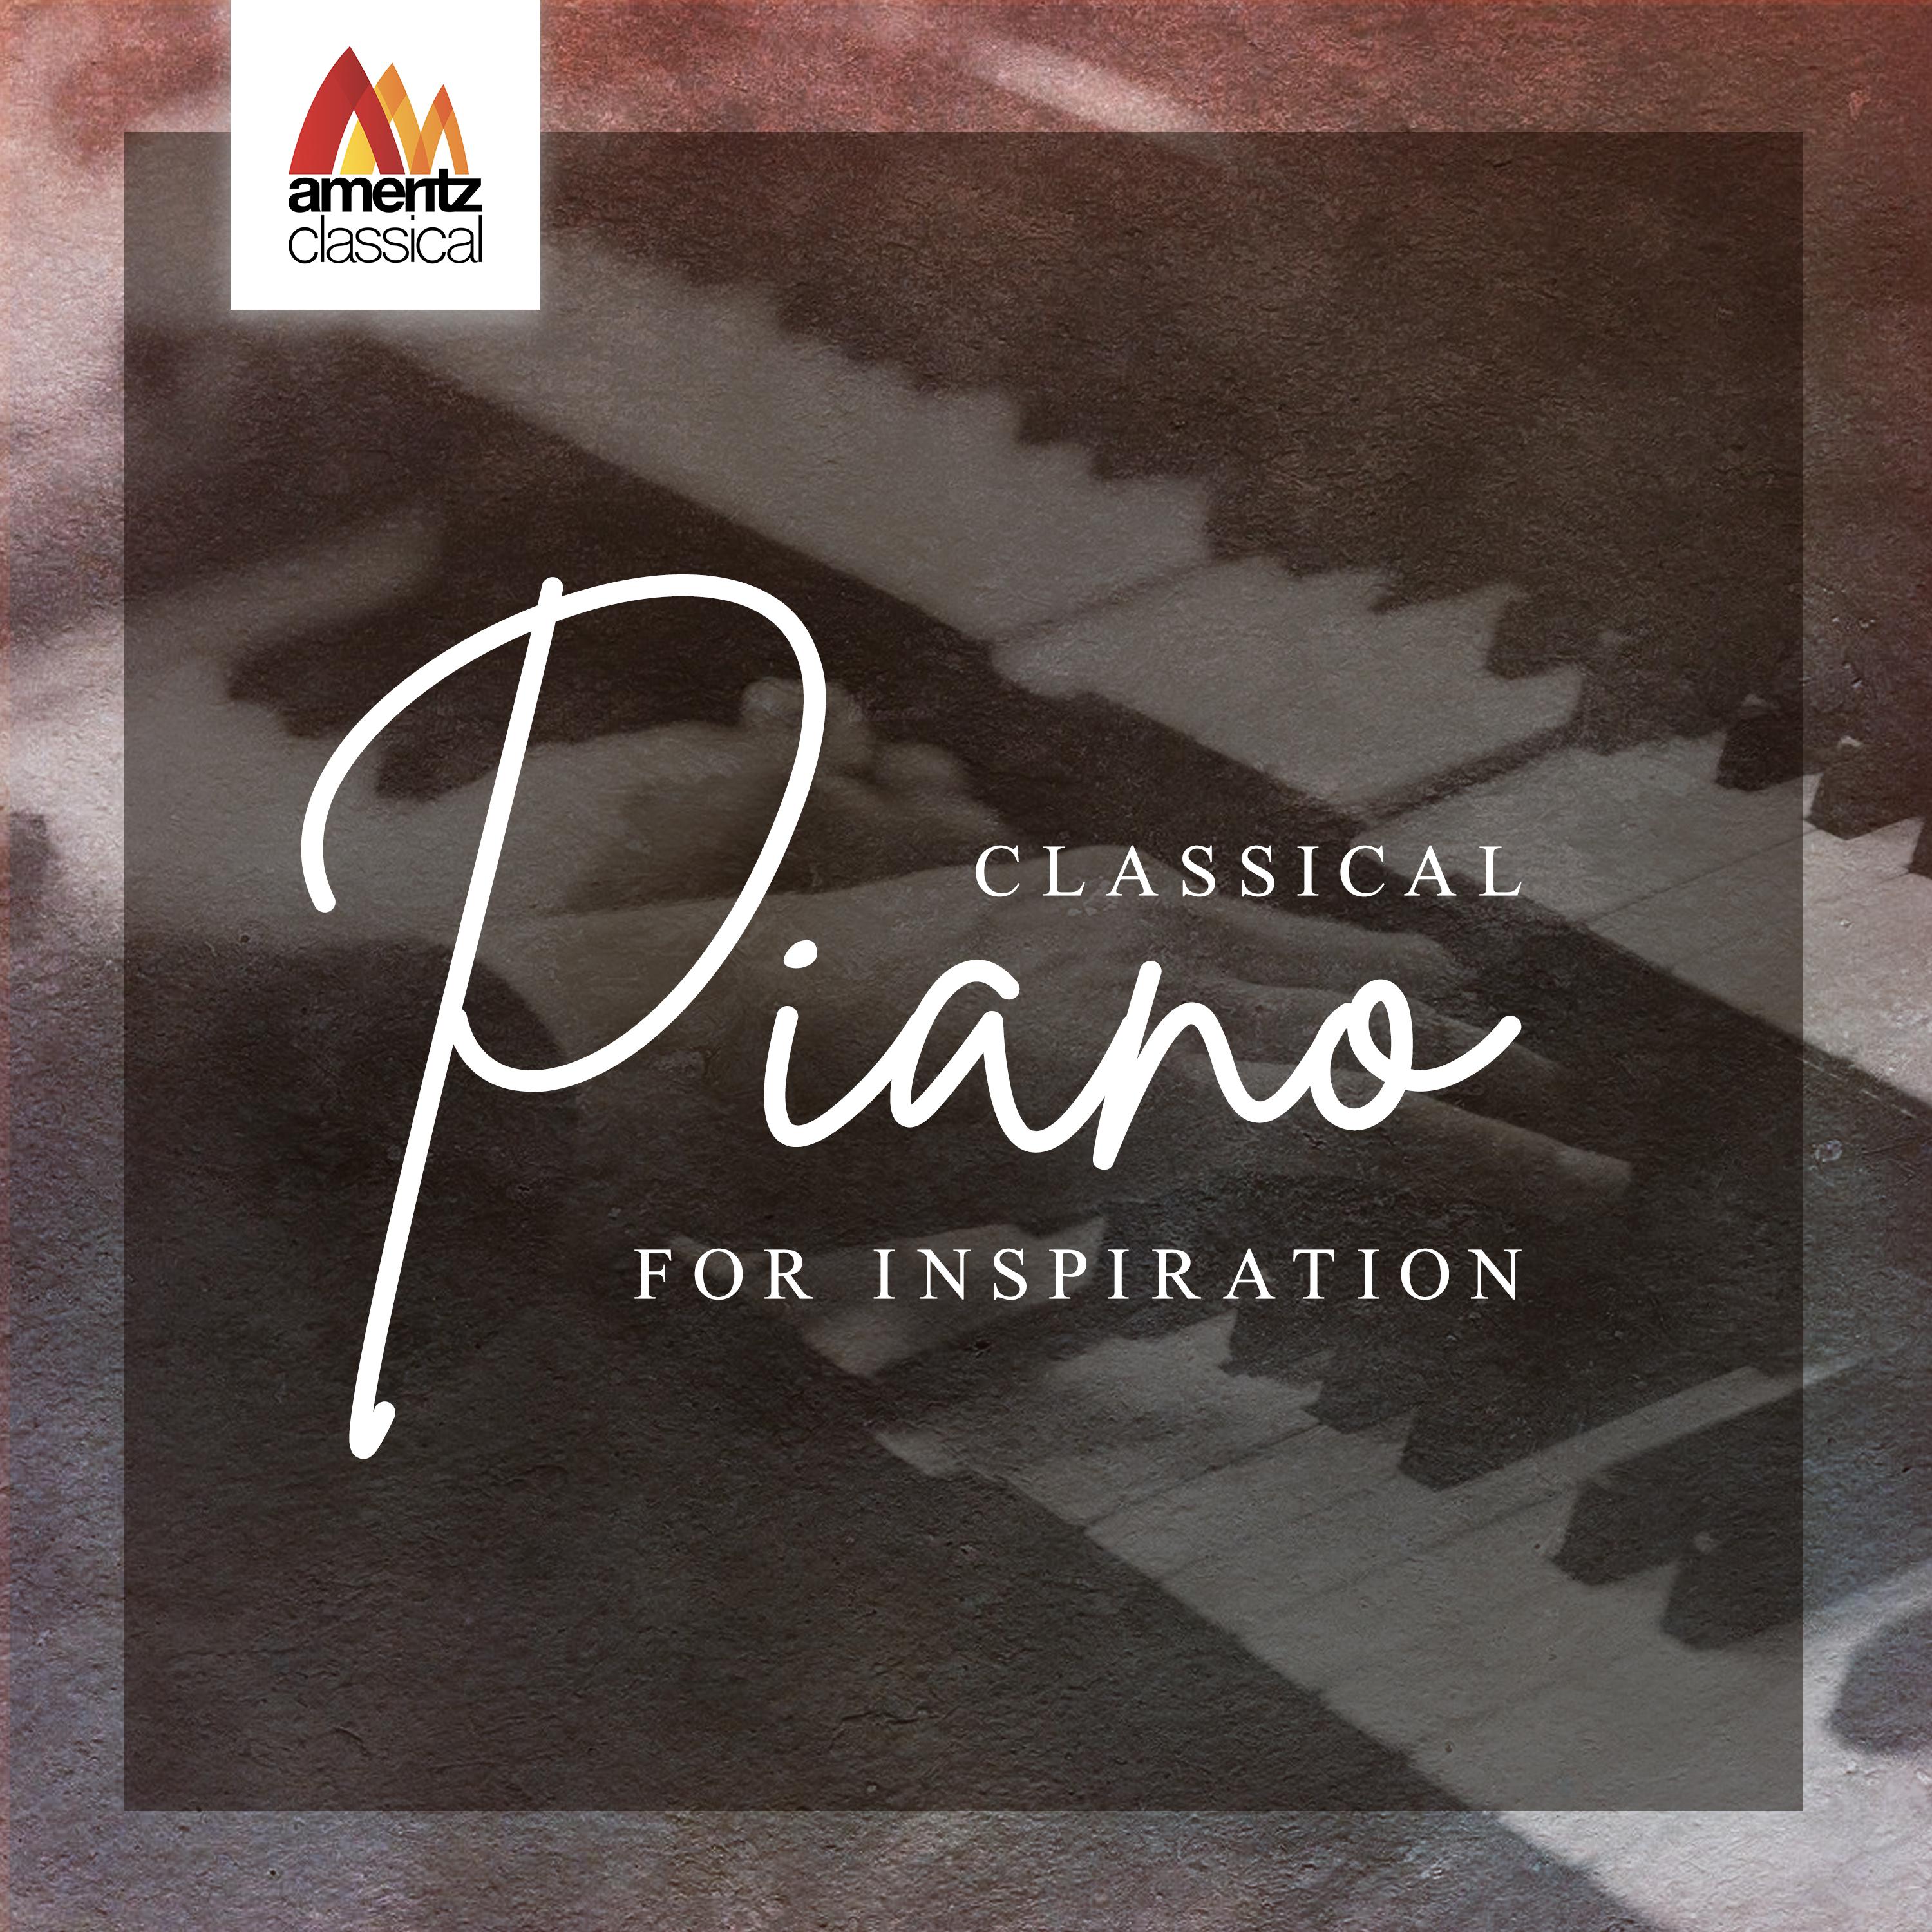 24 Preludes for piano, Op. 11